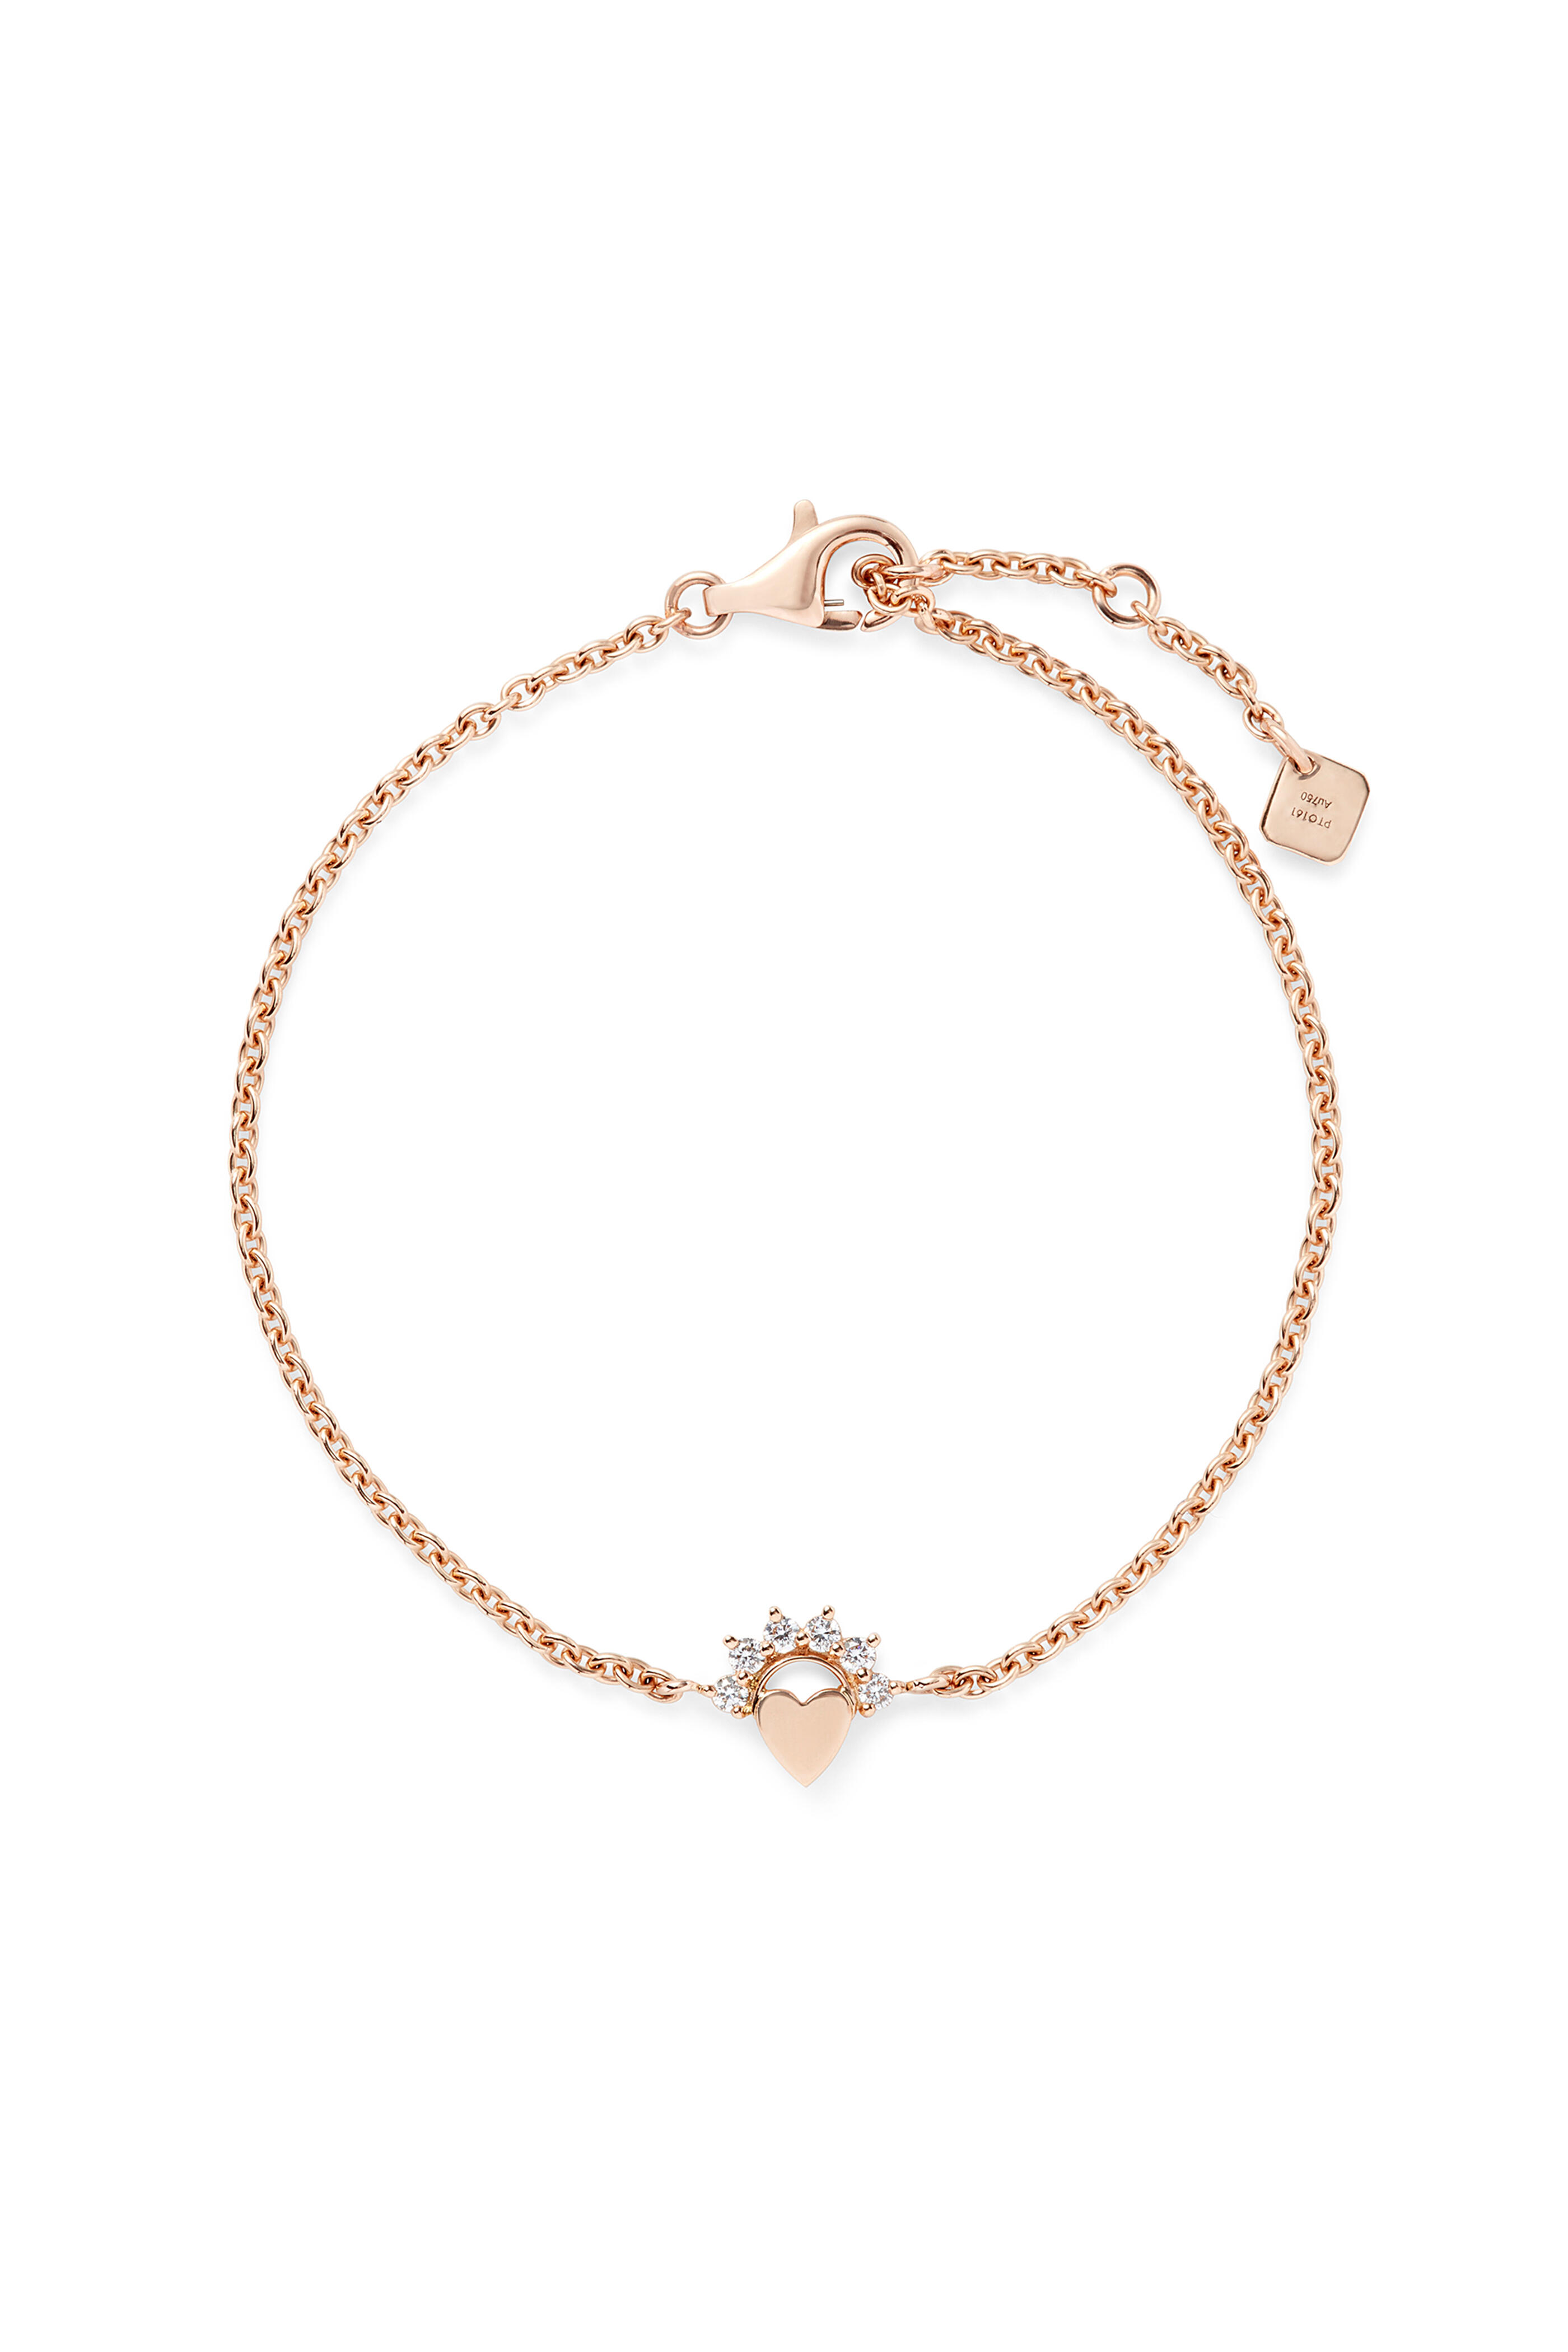 Nouvel Heritage - Mystic Small Love Bracelet | Mitchell Stores